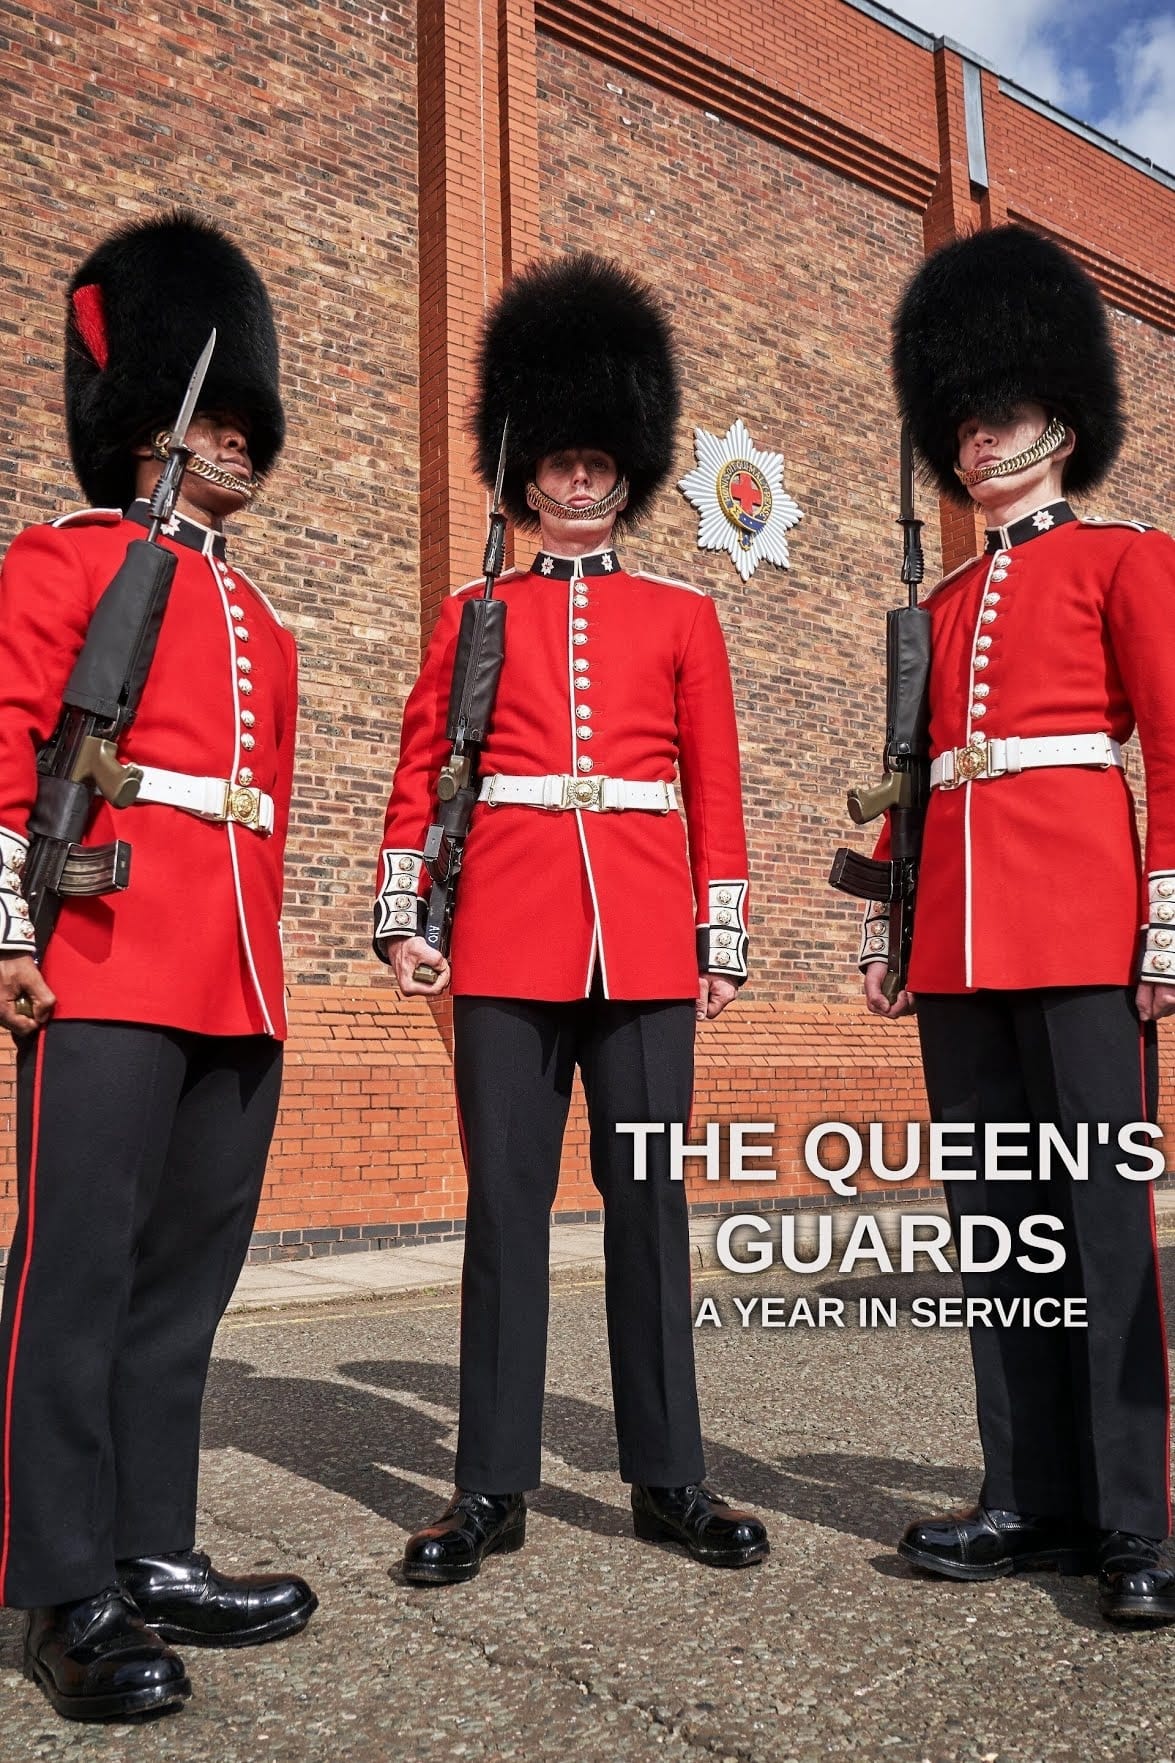 The Queen's Guards: On Her Majesty's Service TV Shows About Army